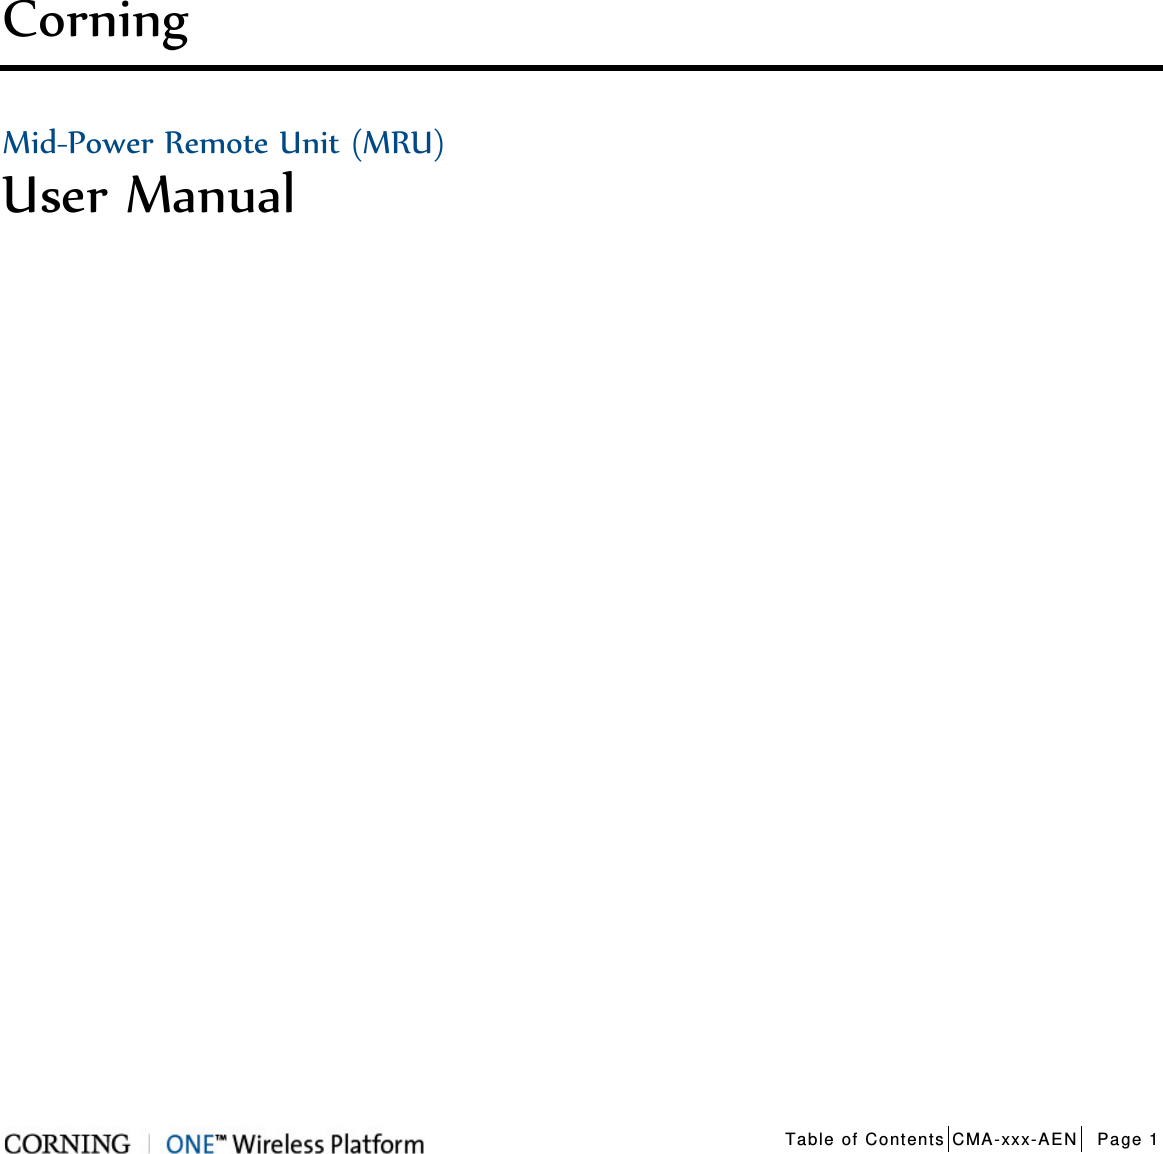  Table of Contents CMA-xxx-AEN Page 1    Corning  Mid-Power Remote Unit (MRU) User Manual                           